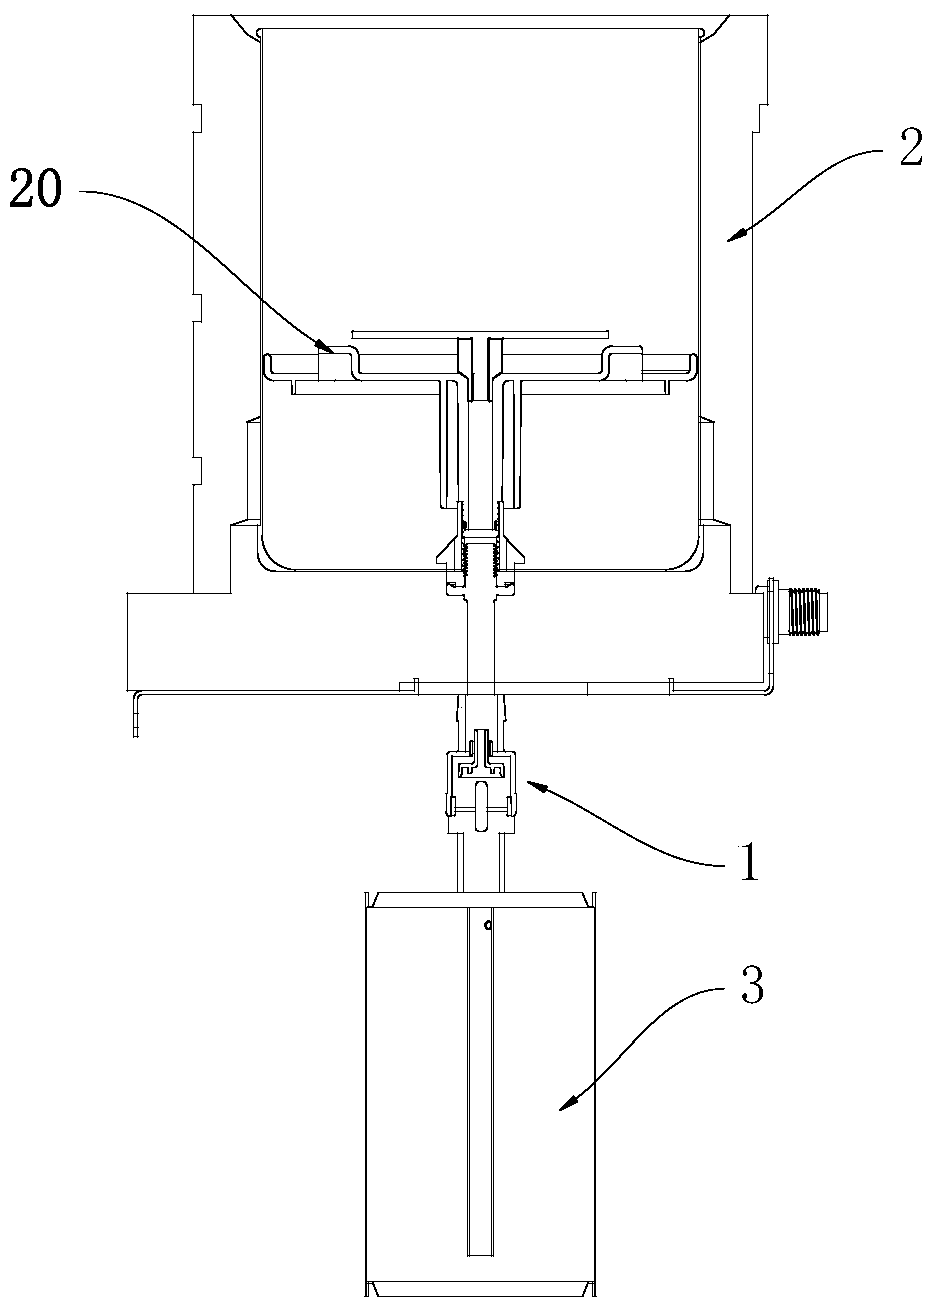 A pressure-discharging one-way valve and a water dispenser